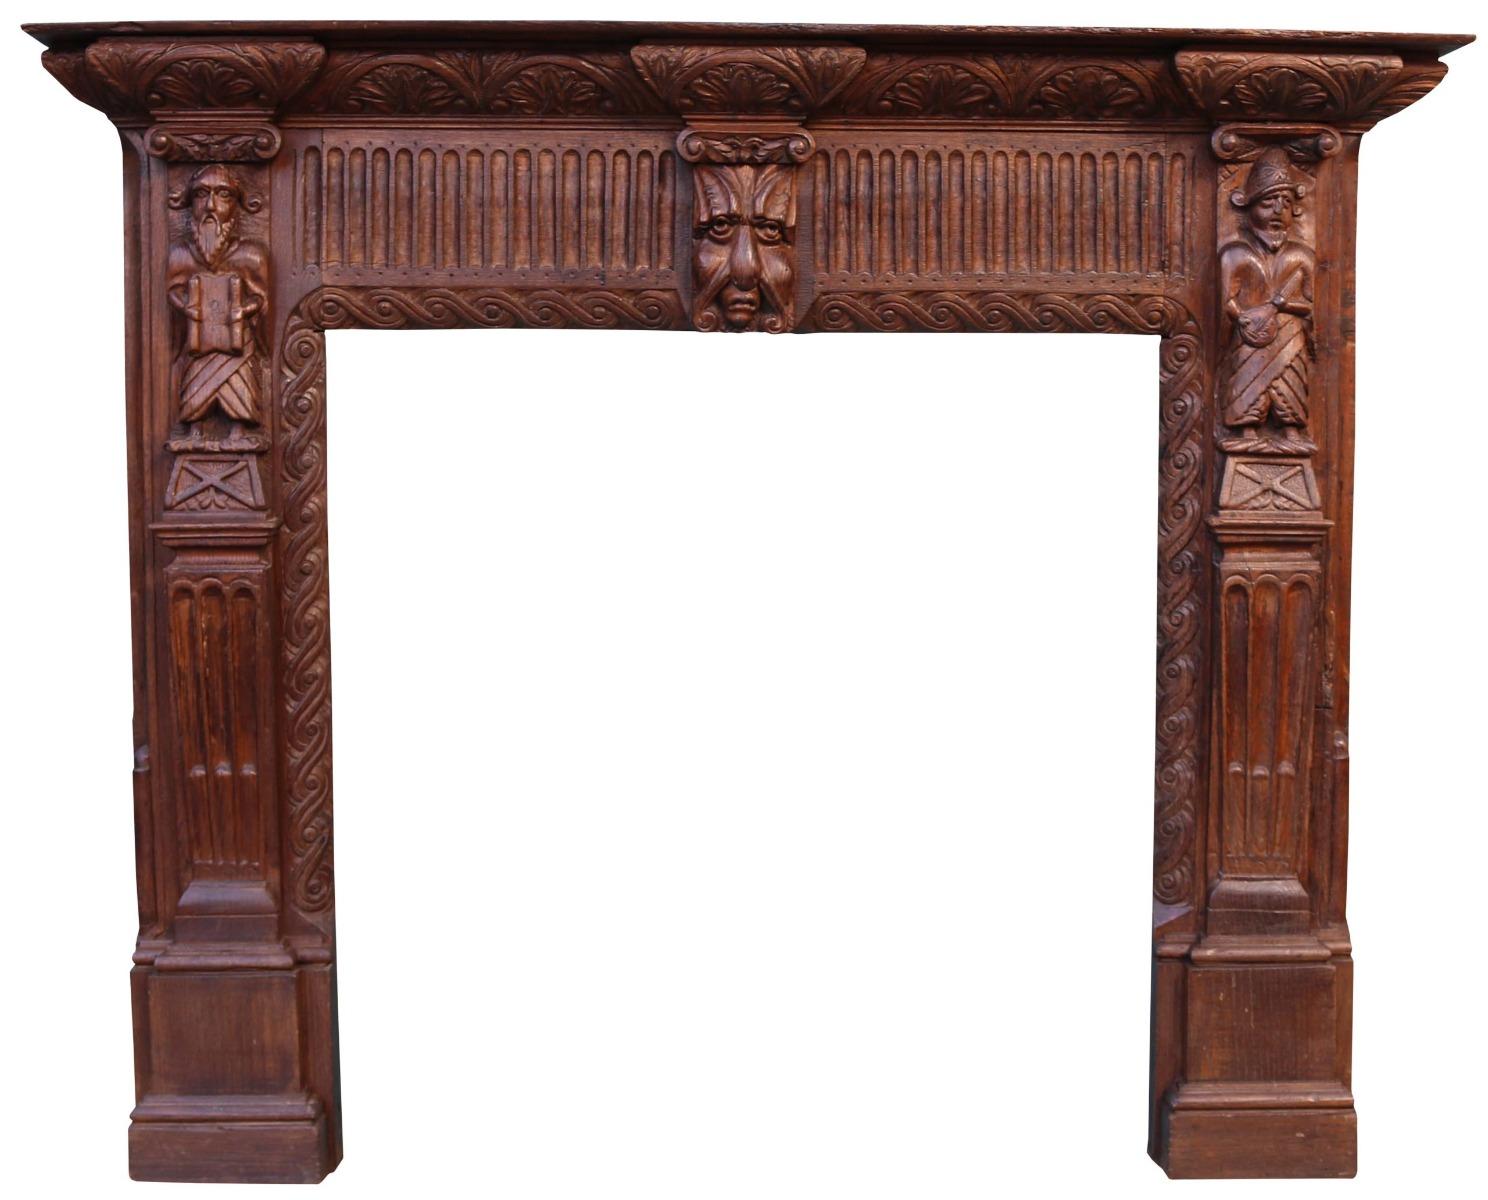 An unusual 19th century carved oak fire surround featuring craved 'Green Man' mask to the frieze and carved depictions of traders to the jambs. This has been constructed from earlier timbers, possibly 18th century elements. This fireplace is